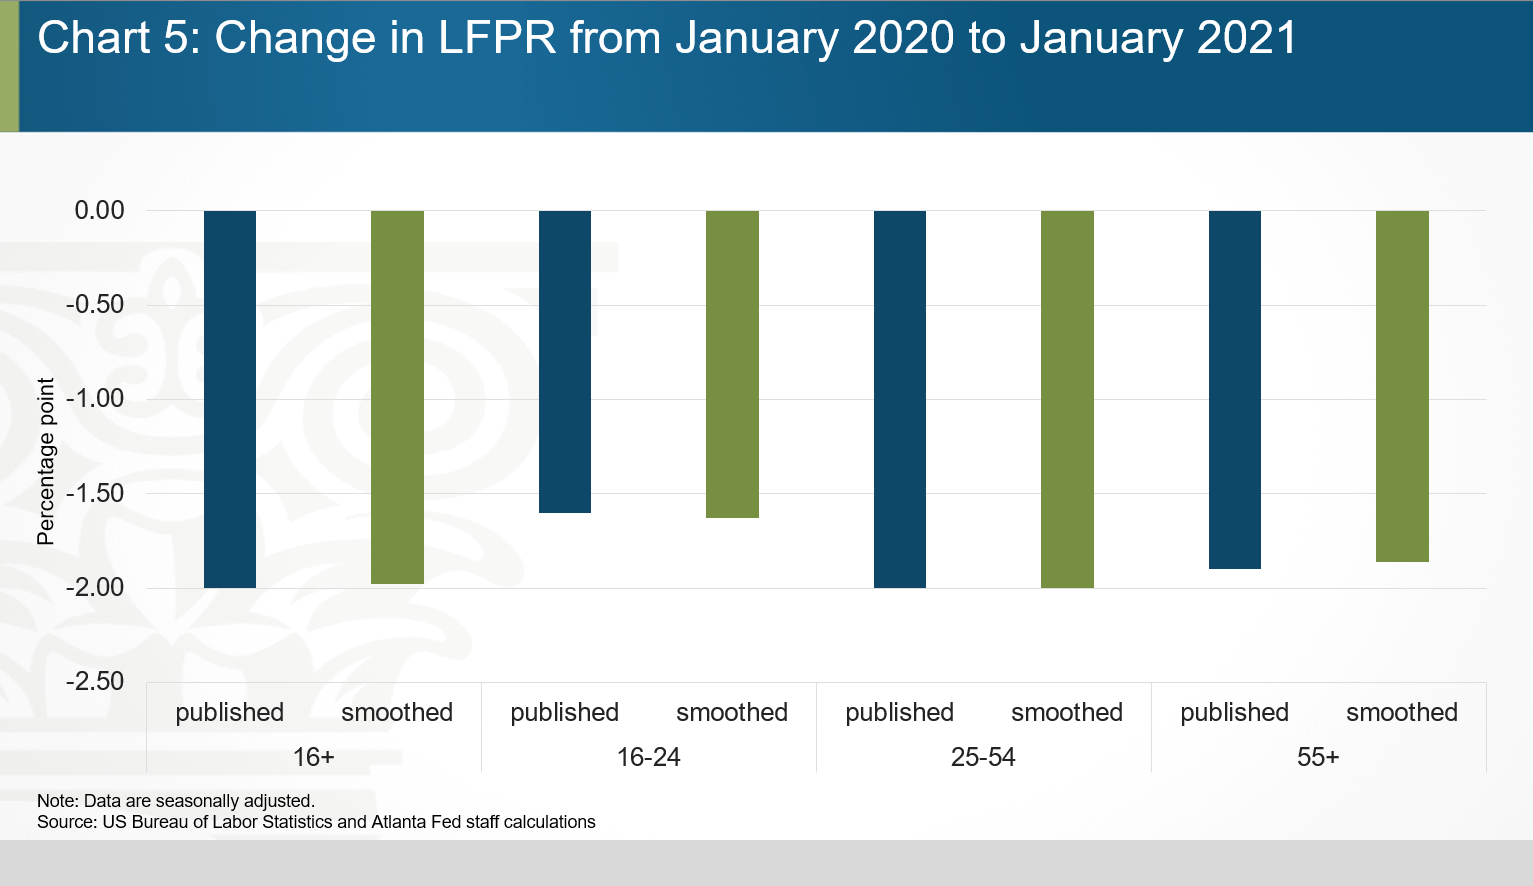 Chart 05 of 06: Change in LFPR from January 2020 to January 2021